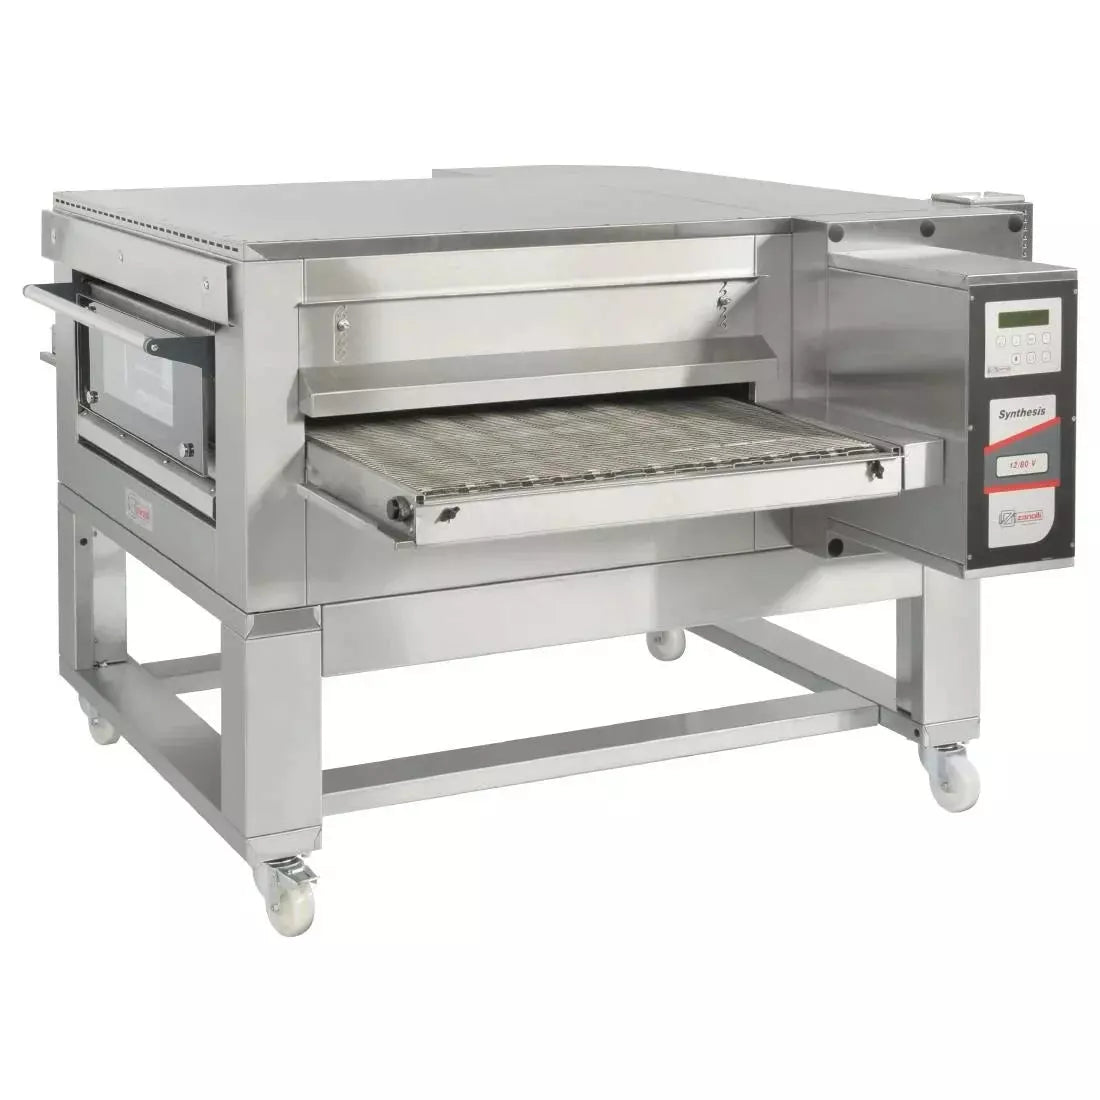 Zanolli Synthesis Electric 12/80 Conveyor Pizza Oven